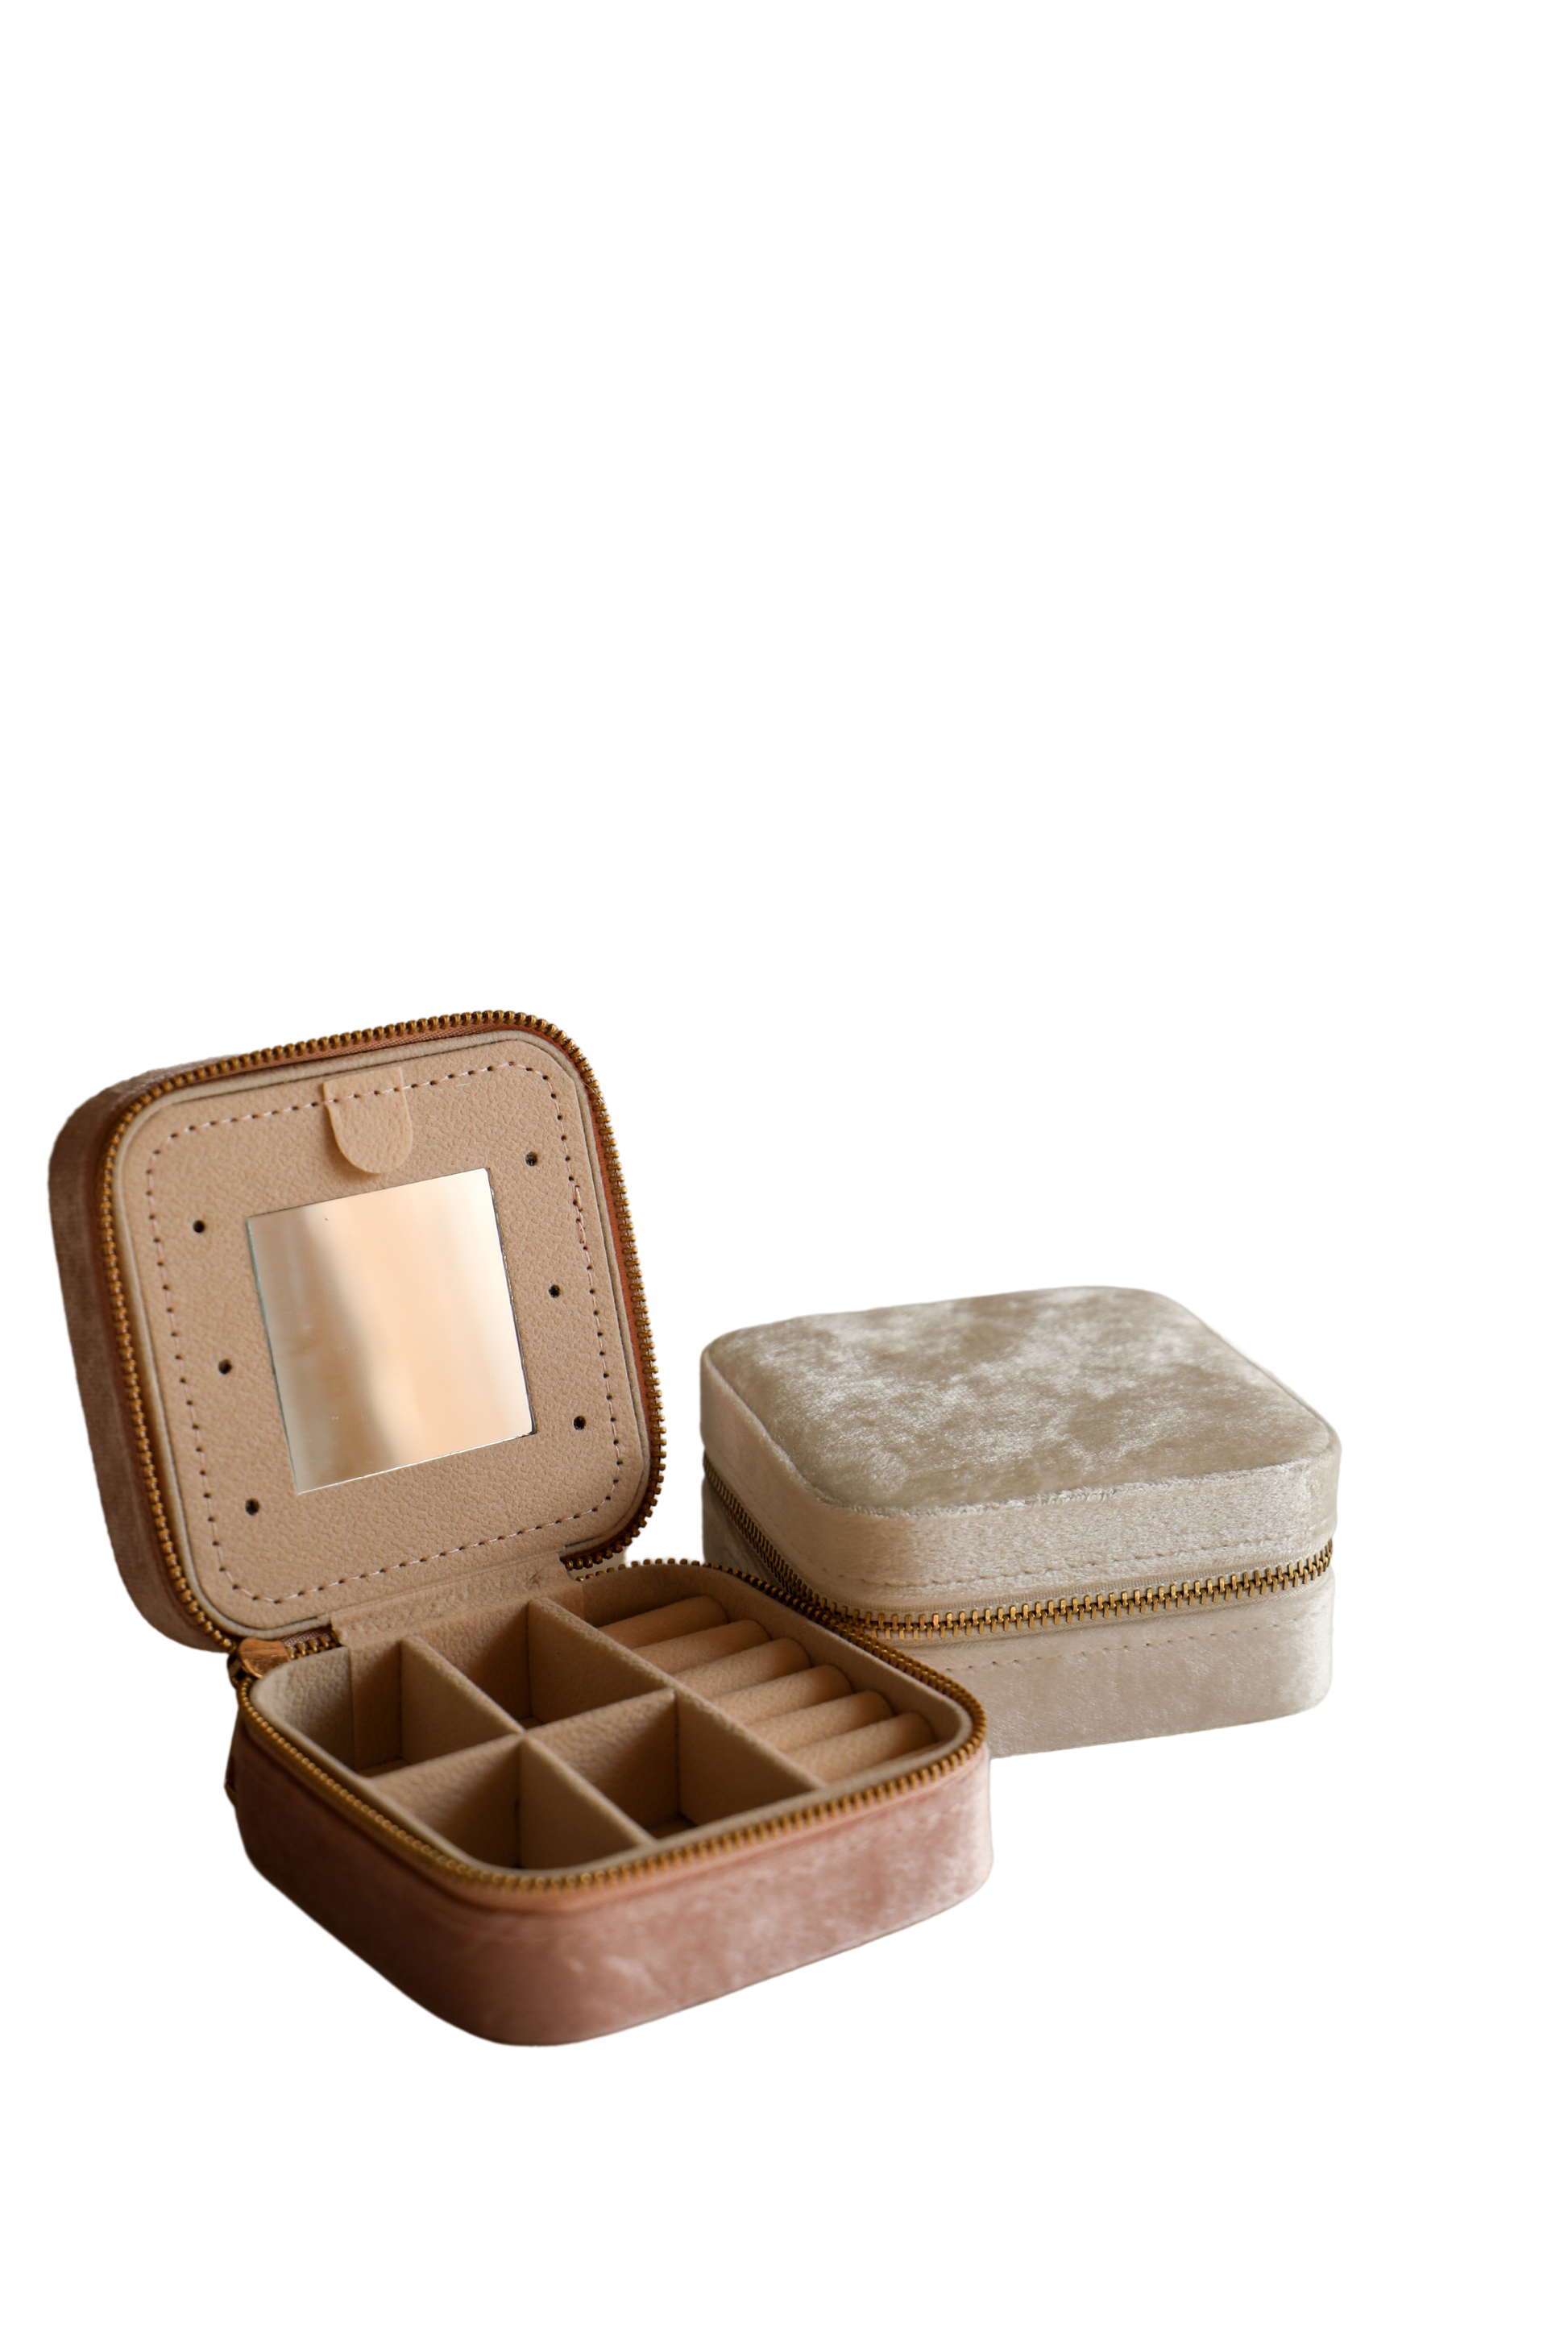 This jewelry box is the perfect bridesmaids gift to store precious pieces. Its classic design ensures lasting elegance to cherish for years to come. Delight your bridesmaids with something special!